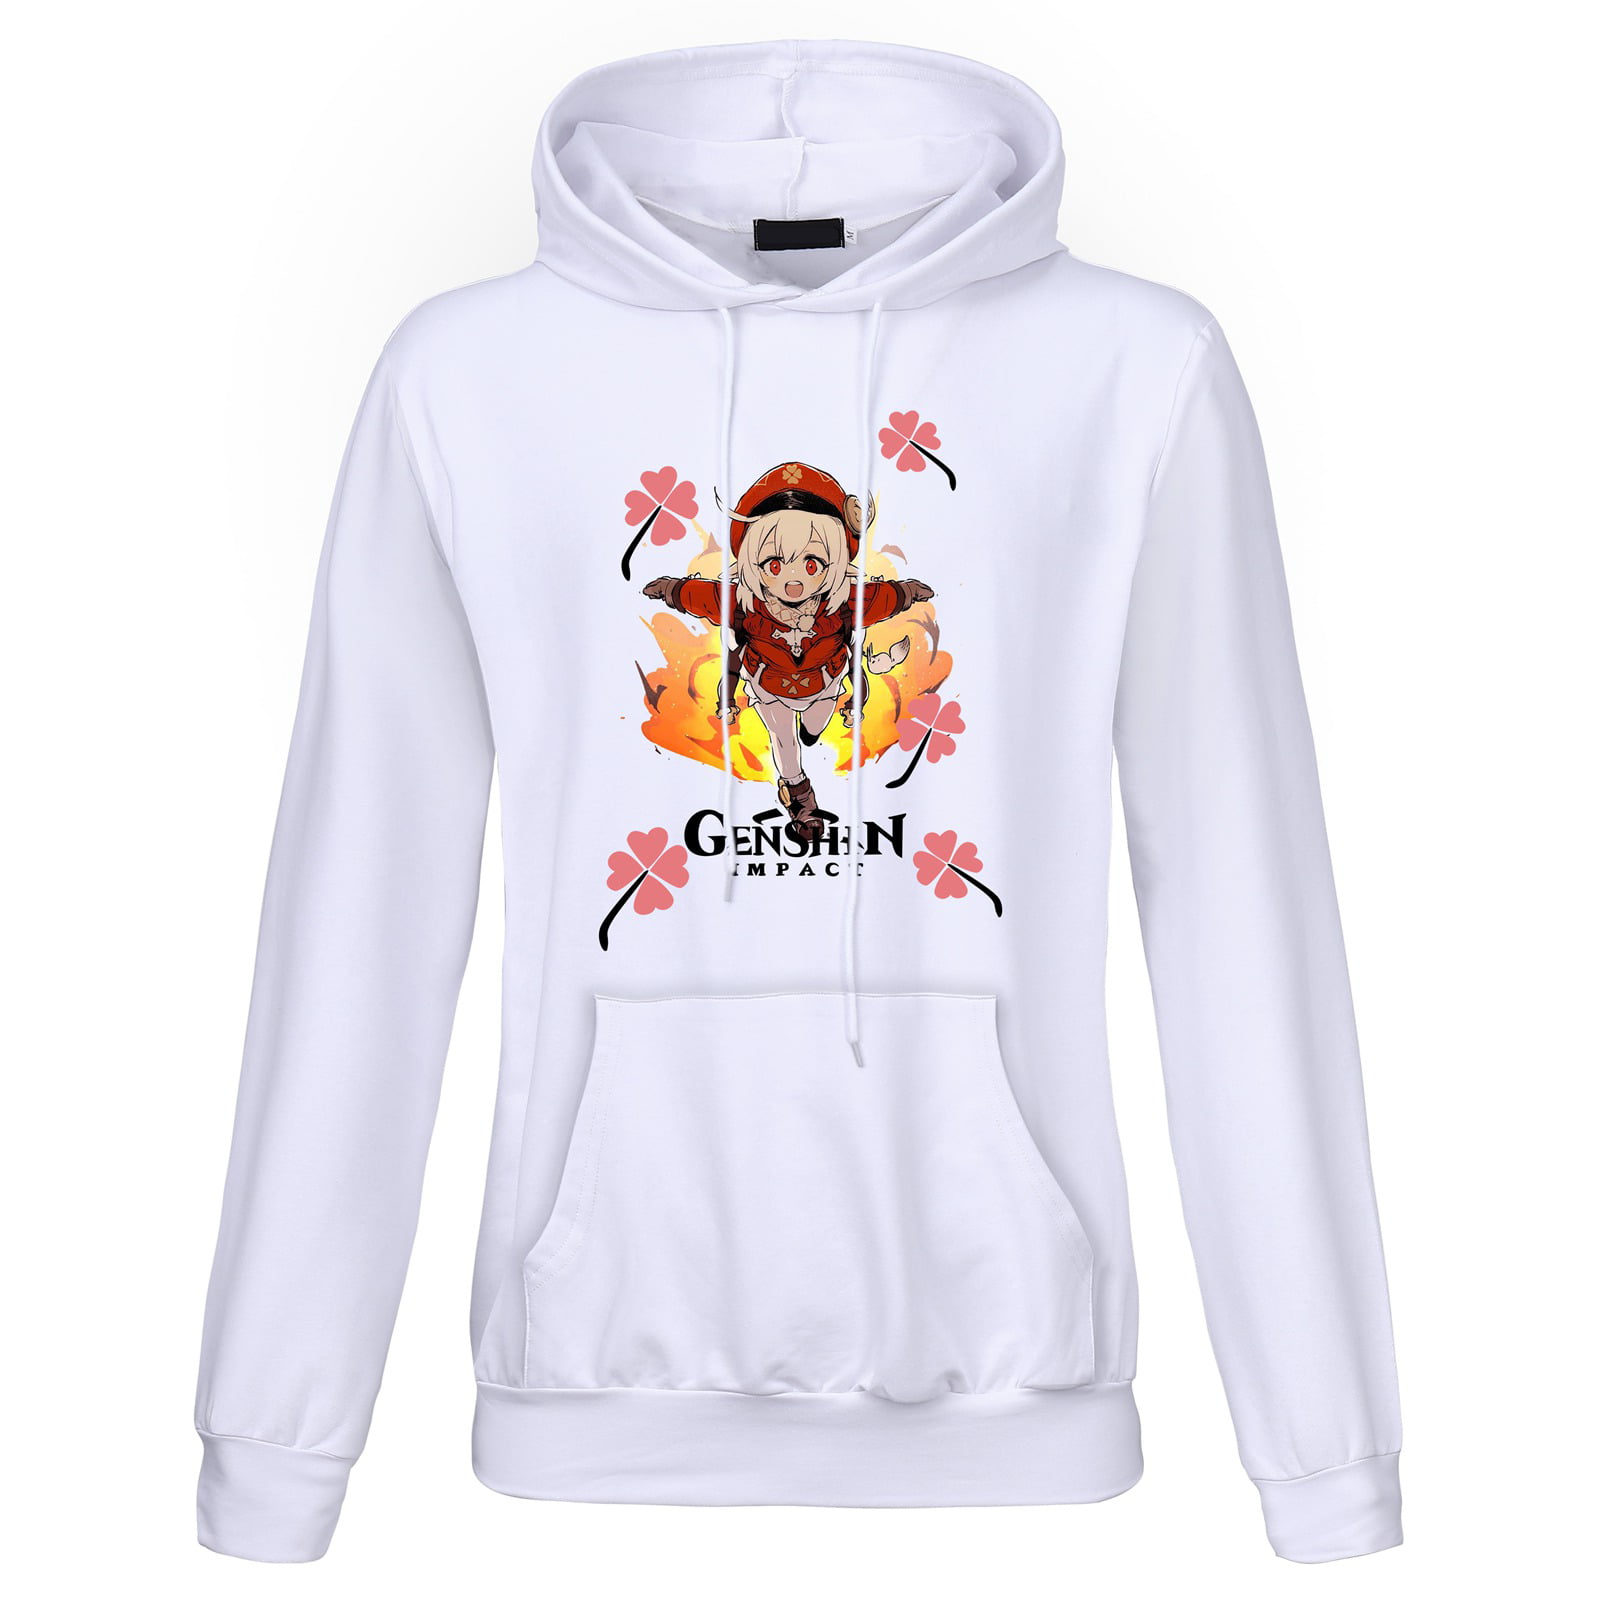 Unisex Babes & Gents Wifisfuneral White Hoodie Sweater 